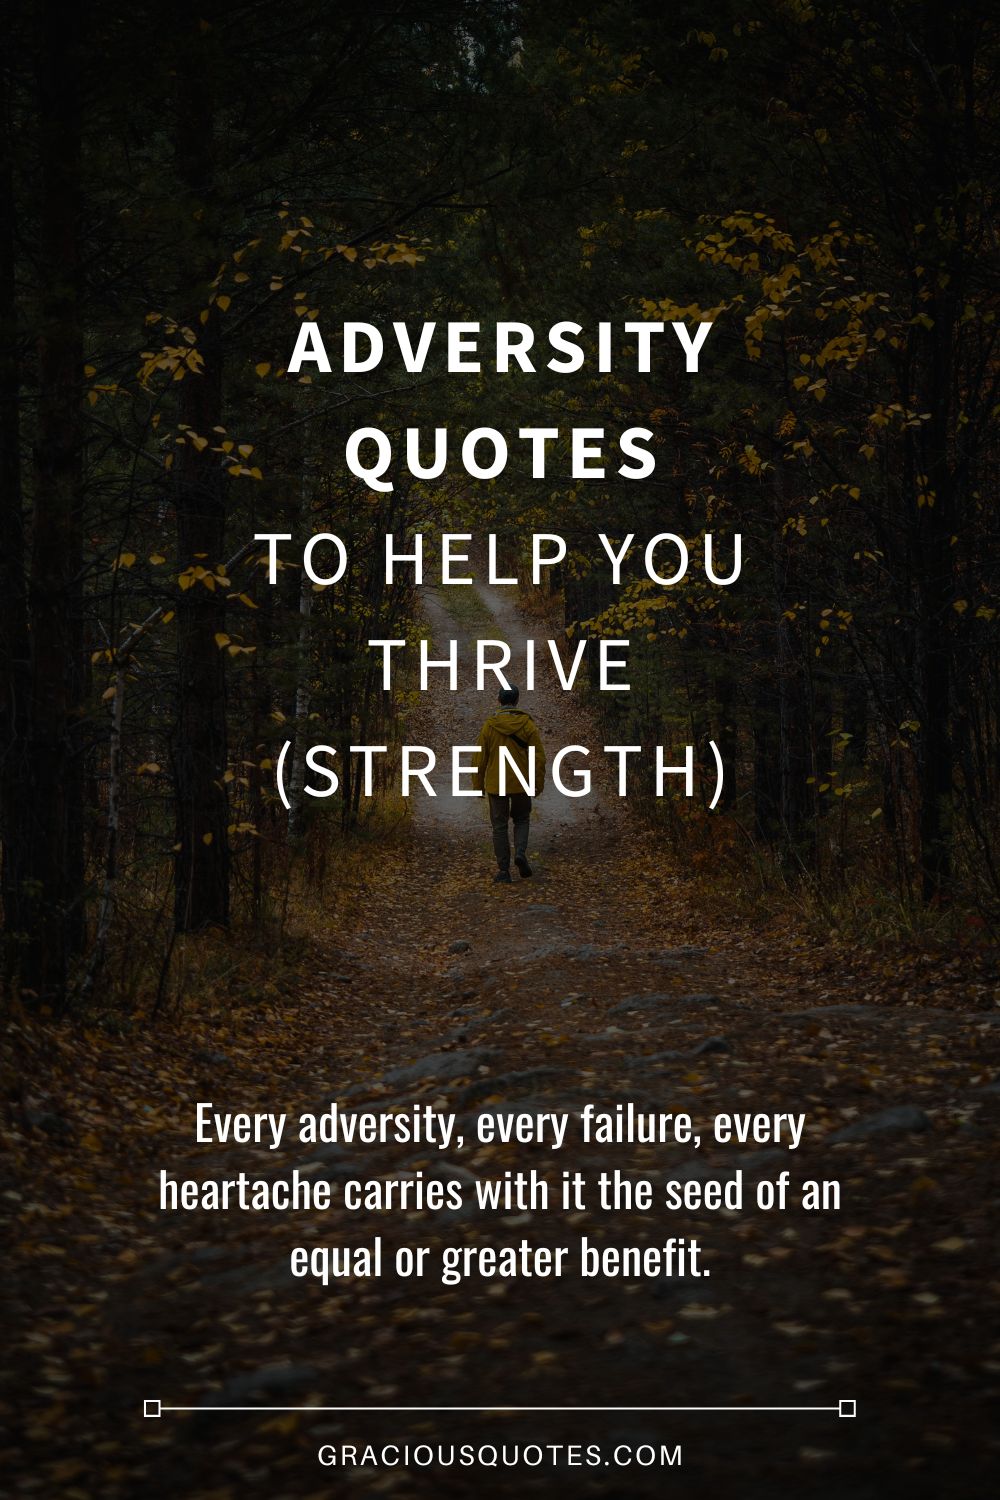 Adversity Quotes to Help You Thrive (STRENGTH) - Gracious Quotes